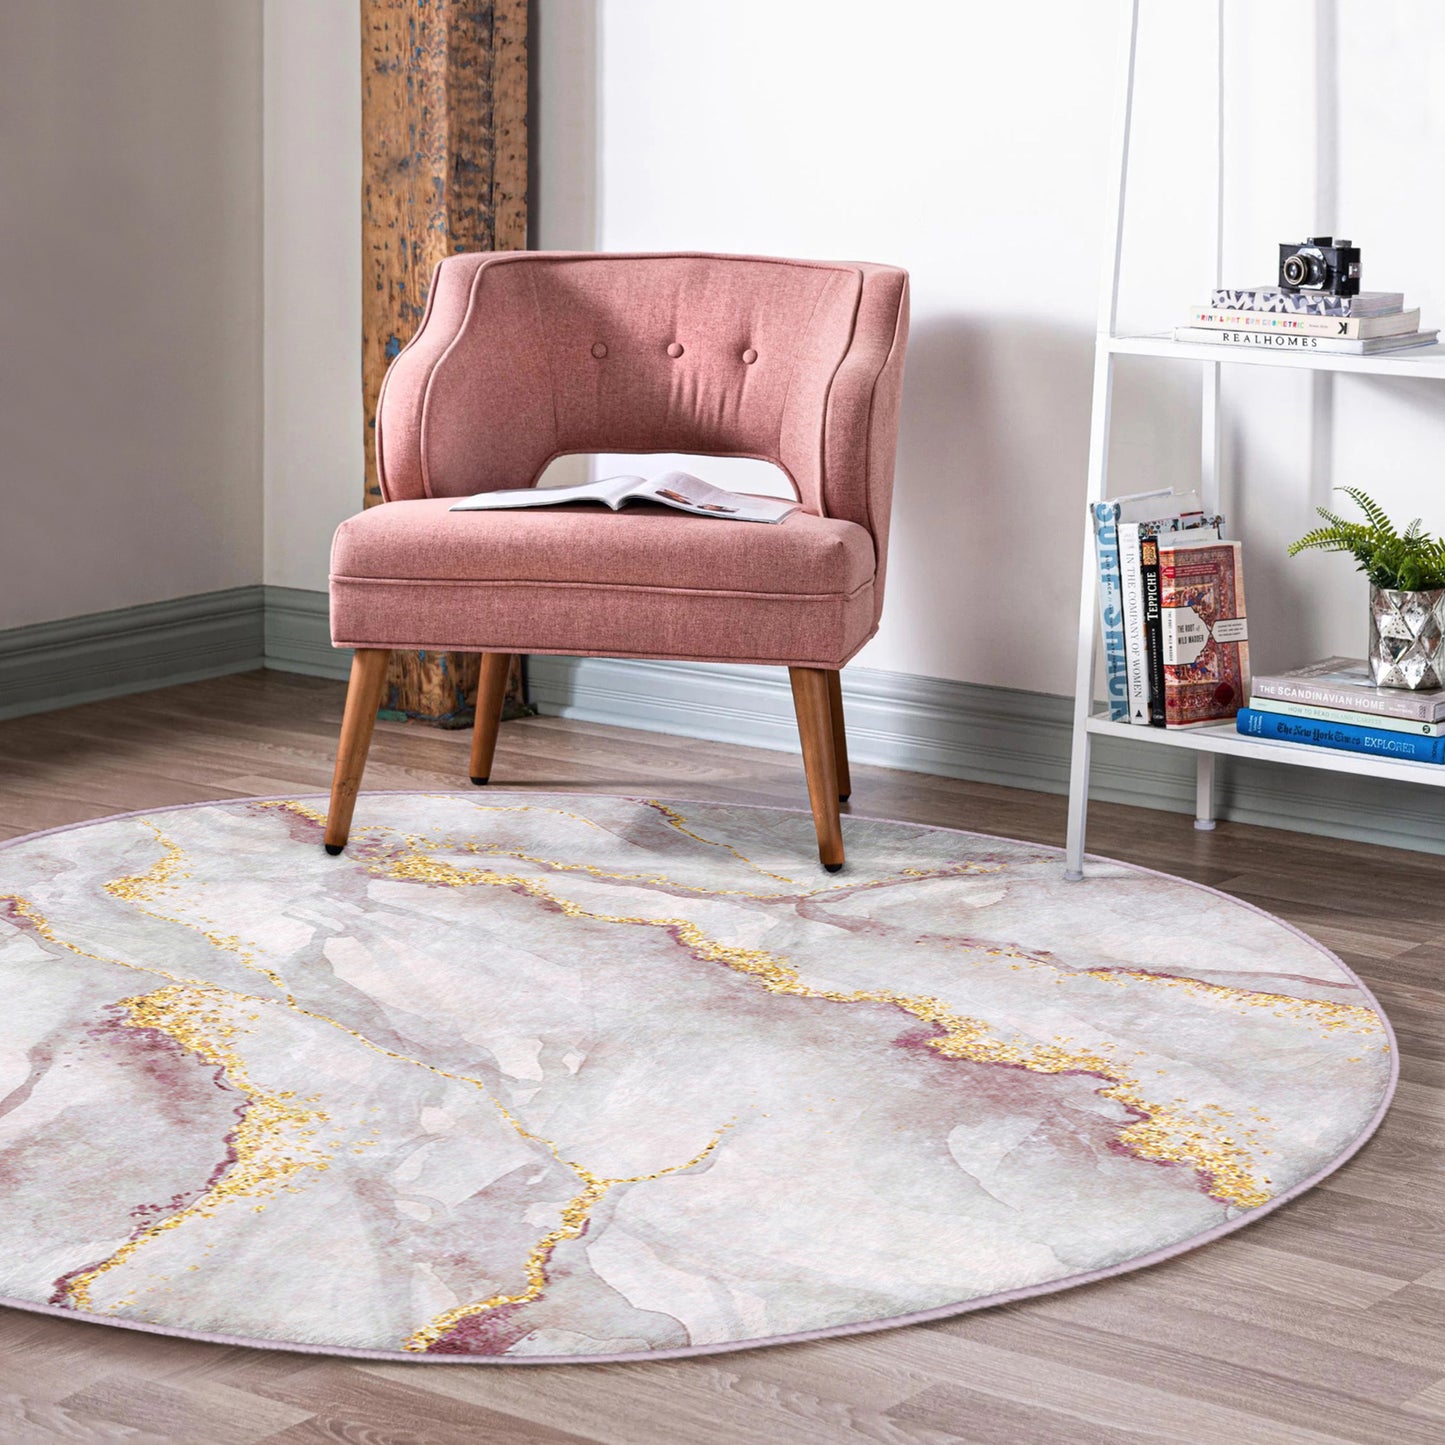 Washable Rug with White Marble Pattern - Easy Maintenance